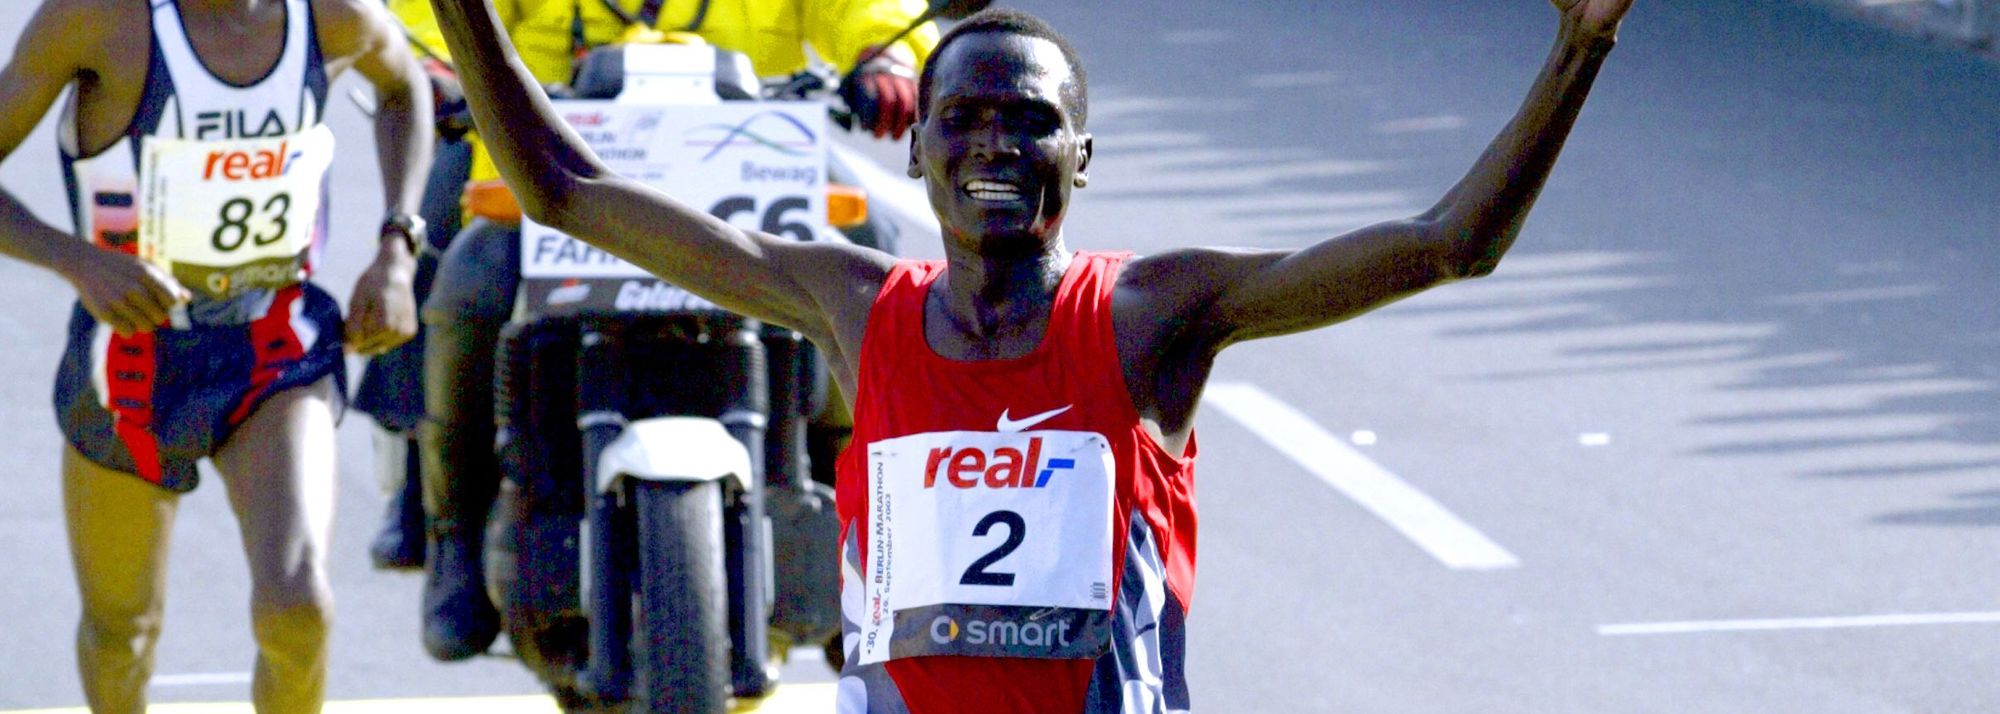 Running 2:04:55 in Berlin, Paul Tergat became the first to break the 2:05 barrier in the marathon